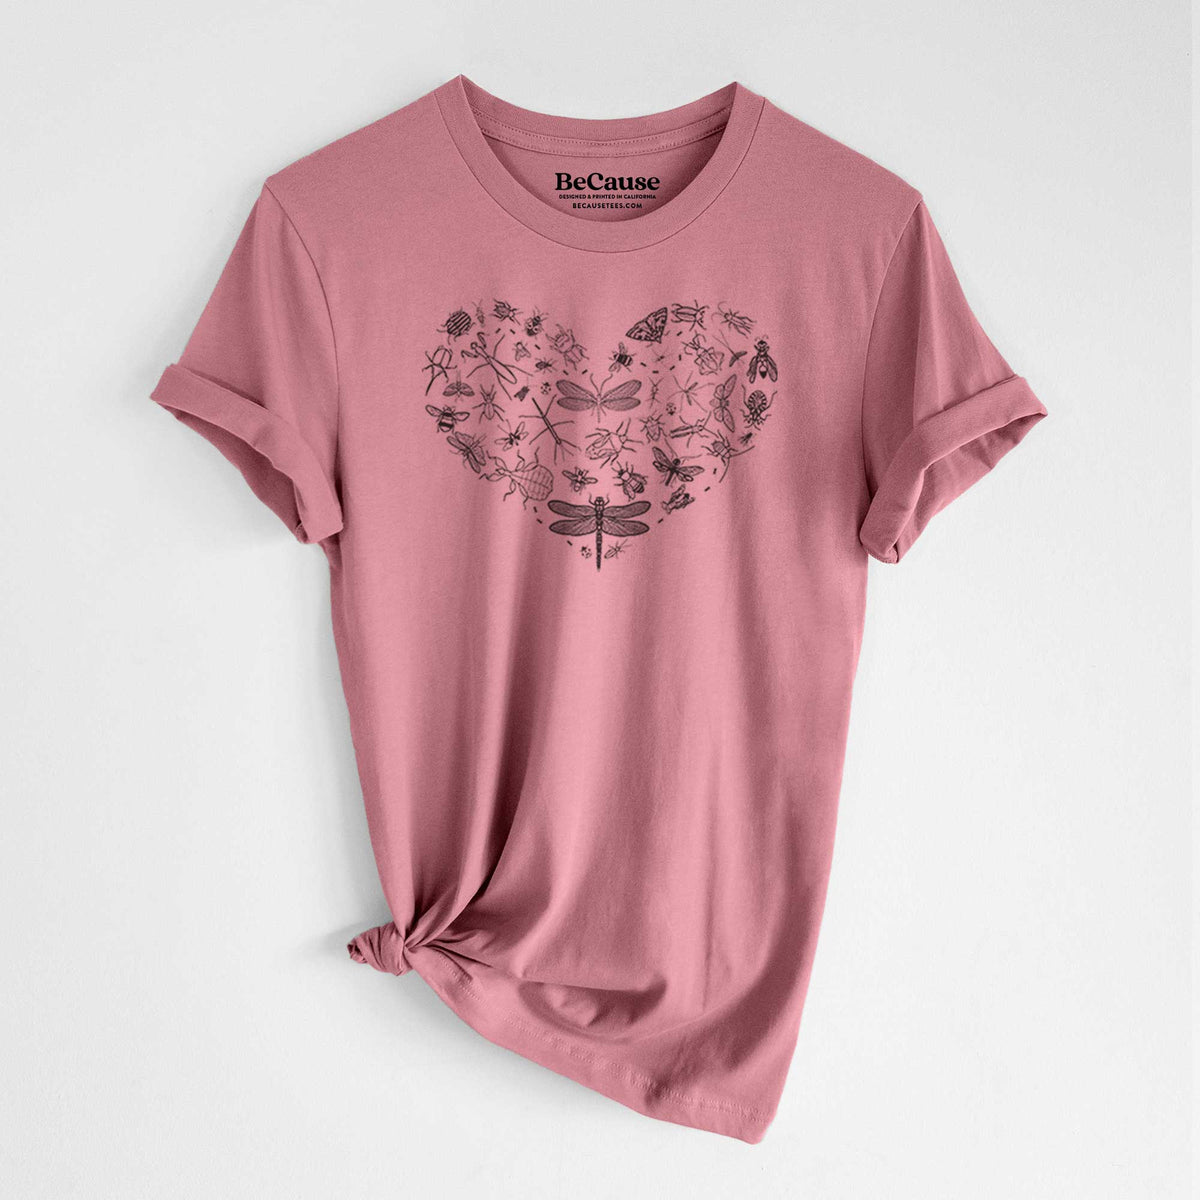 Heart Full of Insects - Lightweight 100% Cotton Unisex Crewneck